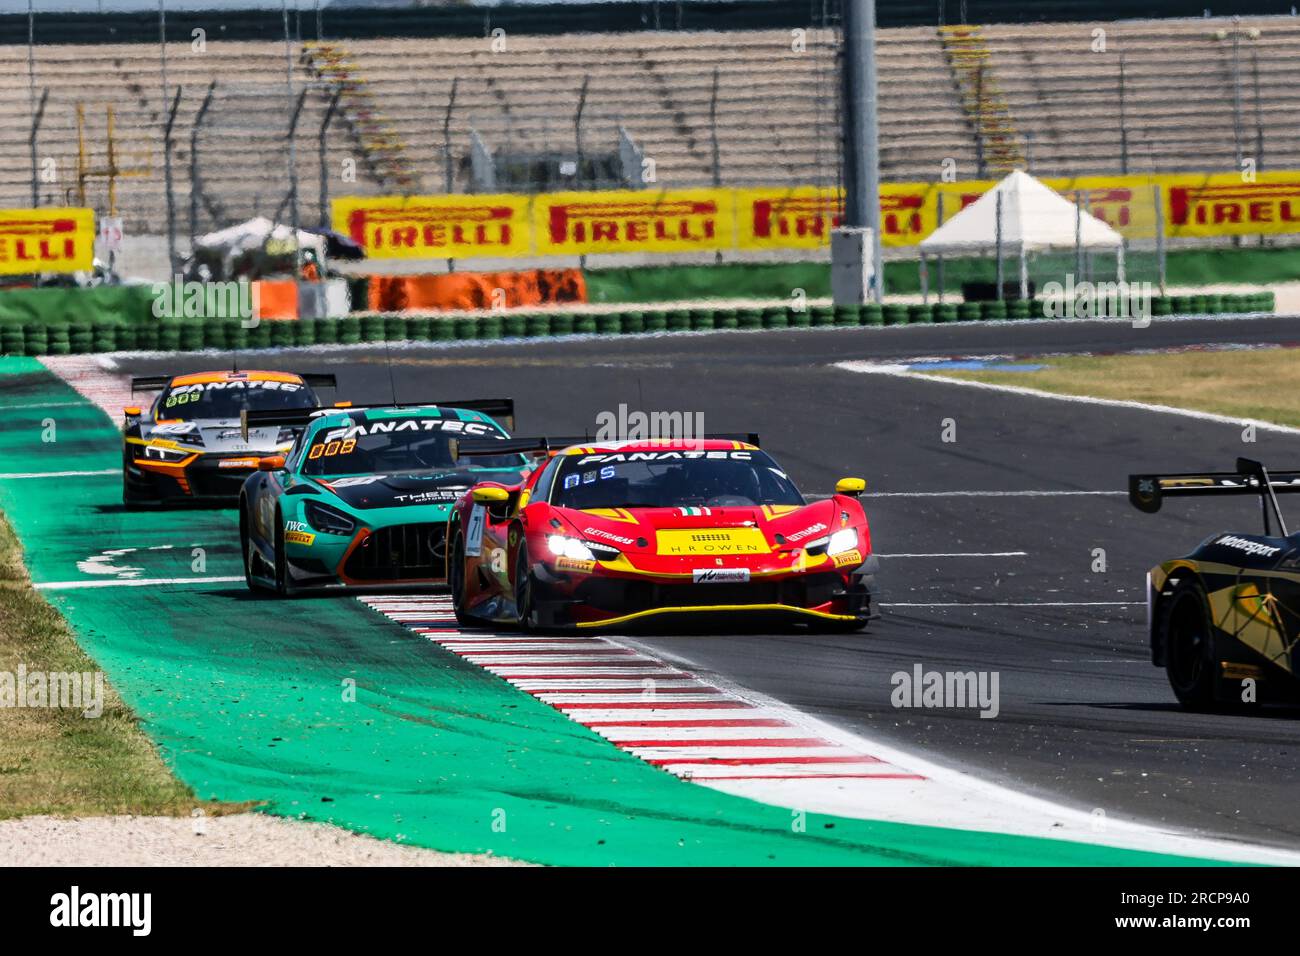 71 Sean HUDSPETH, Nicolas MARINANGELI, AF Corse Ferrari 296 GT3, action during the 5th round of GT World Challenge Europe Sprint Cup 2023, at Misano, Italy from July 14 to 16, 2023 - Photo Grégory Lenormand/DPPI Credit: DPPI Media/Alamy Live News Stock Photo